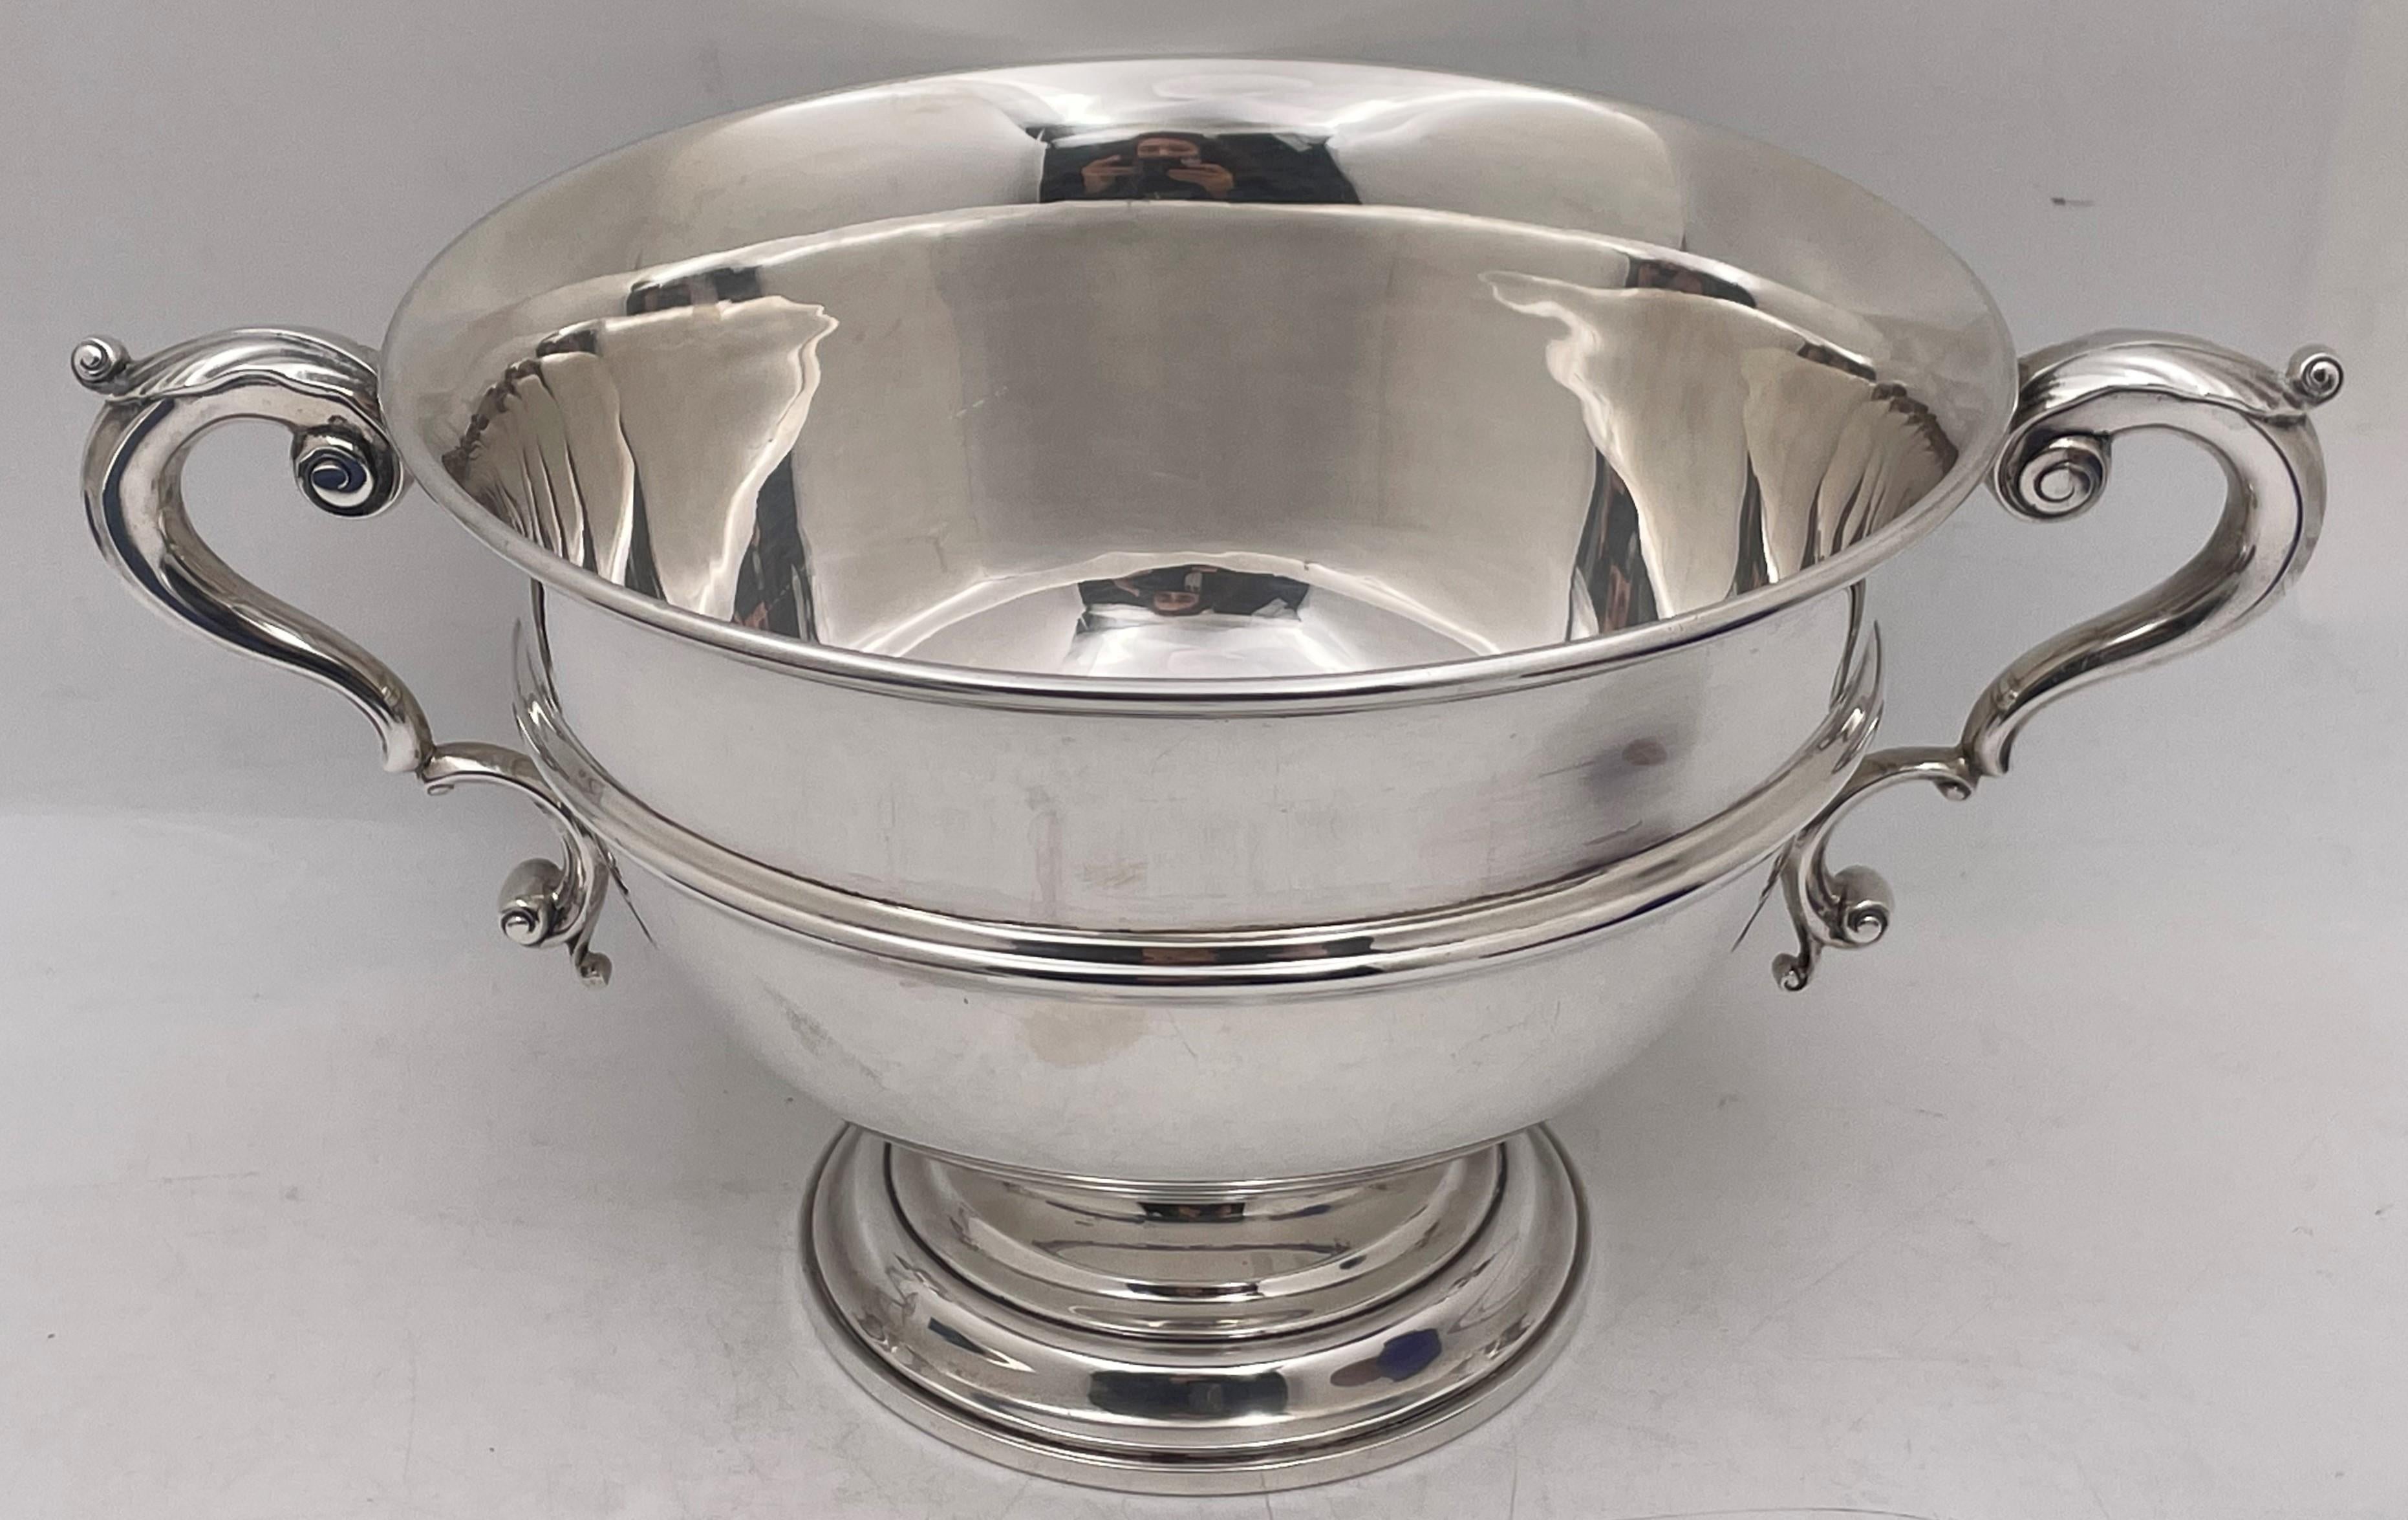 Cartier sterling silver two-handled centerpiece bowl or trophy with an elegant, geometric design. It measures 12 3/4'' from handle to handle (bowl diameter is 8 3/4'') by 6 1/8'' in height, weighs 32.1 troy ounces, and bears hallmarks and a monogram